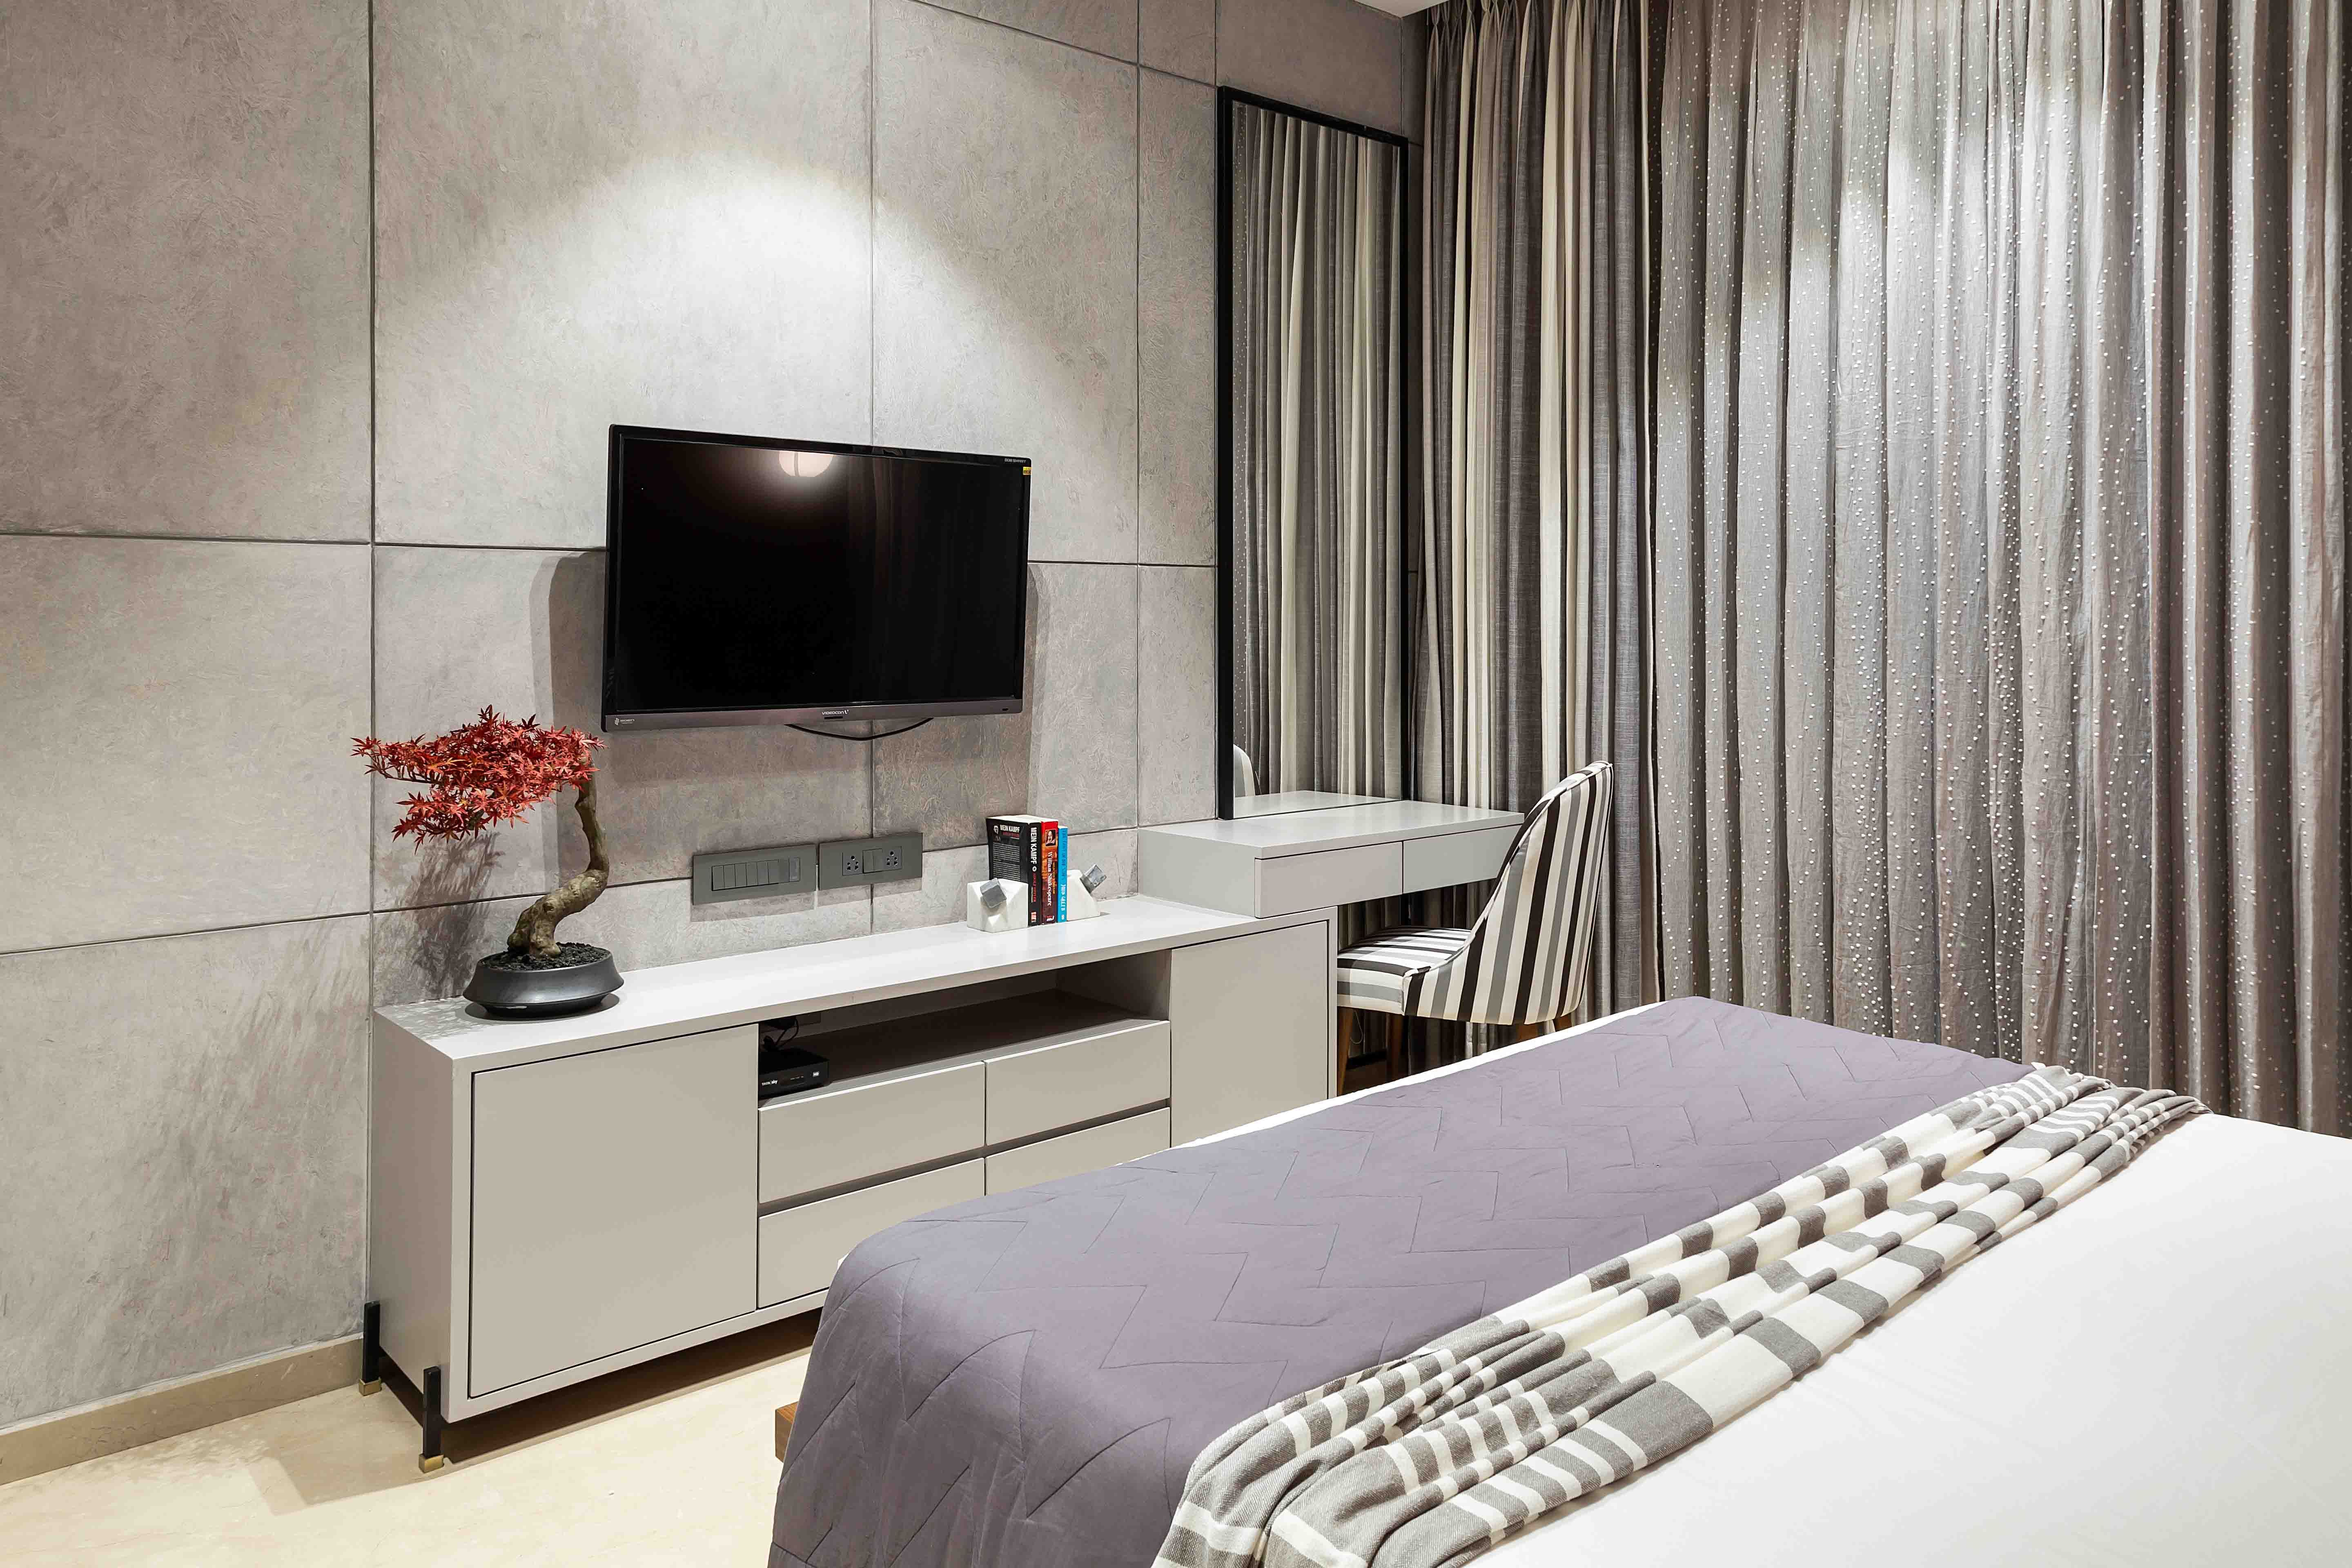 Modern Grey Bedroom Wall Design With Grooves And Textured Paint